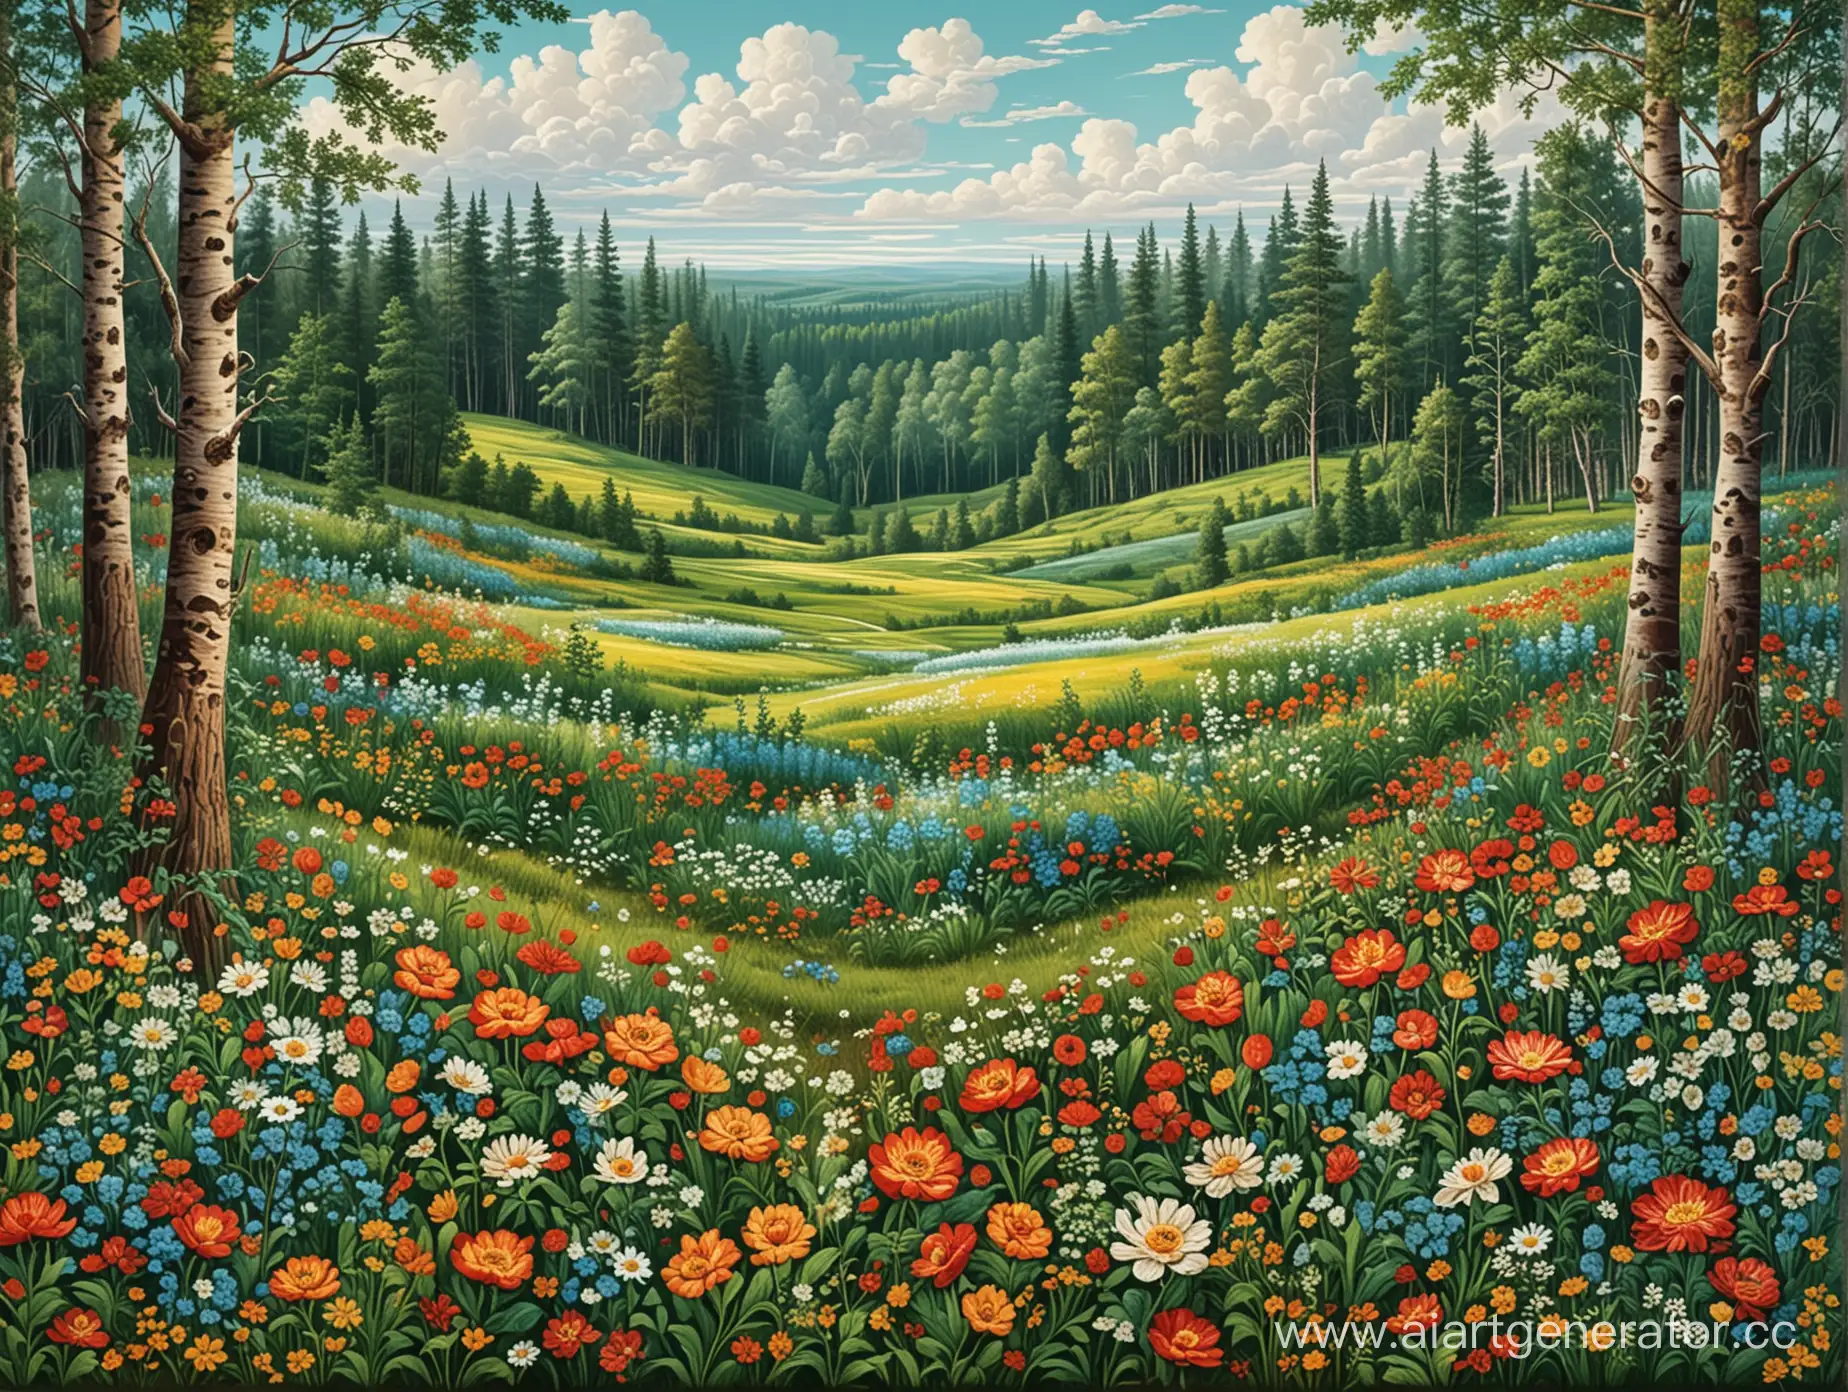 Picturesque-Russian-Folk-Patterned-Clearing